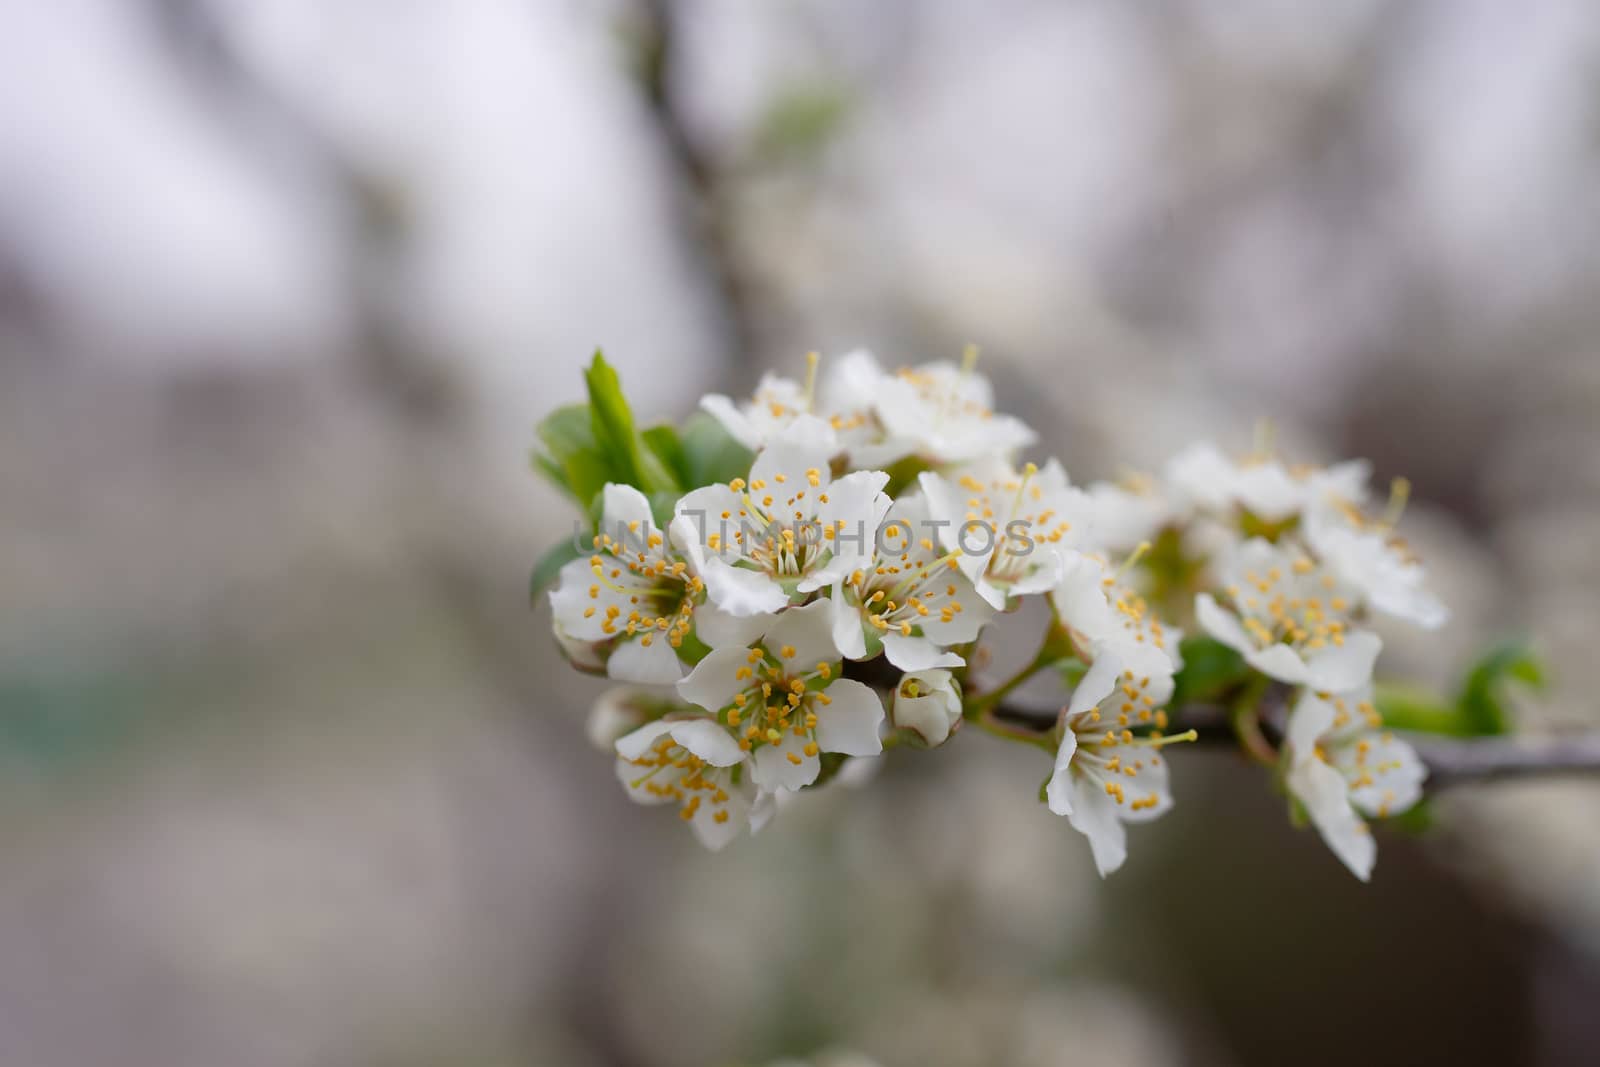 Cherry flower inflorescences on blurred background. by alexsdriver